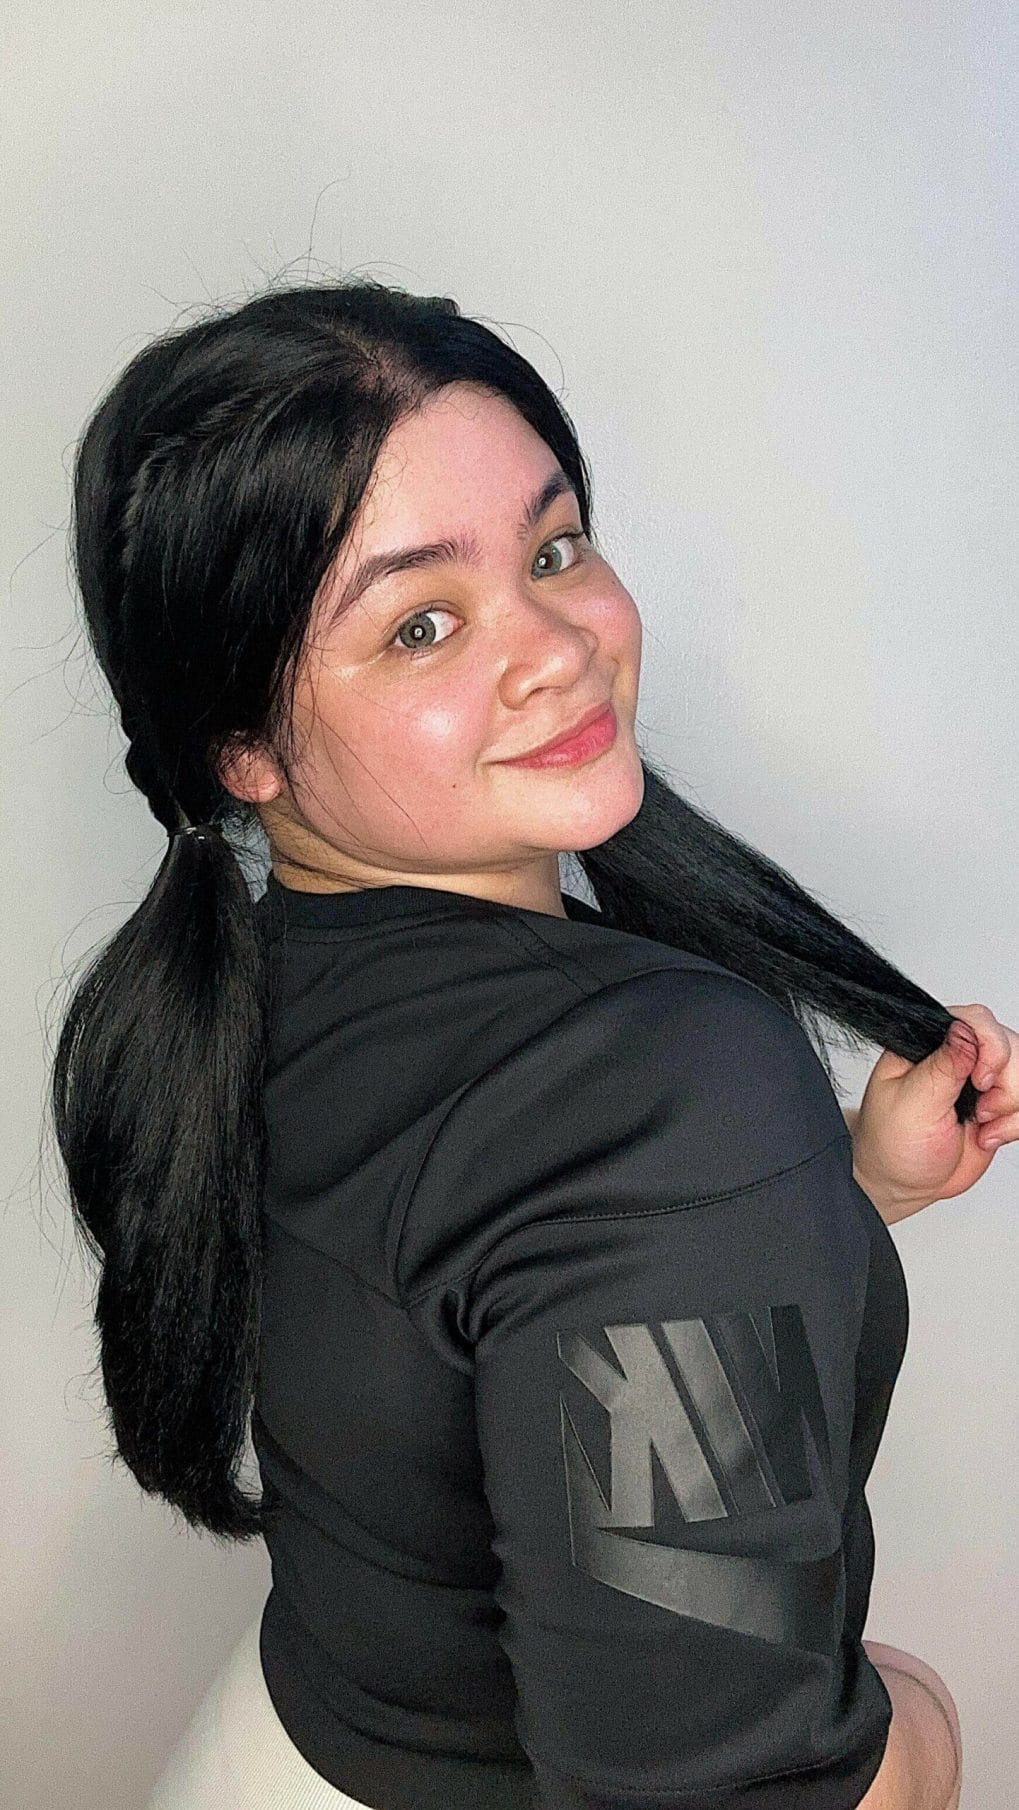 Fun pigtails jet-black hairstyle for straightforward softball styling